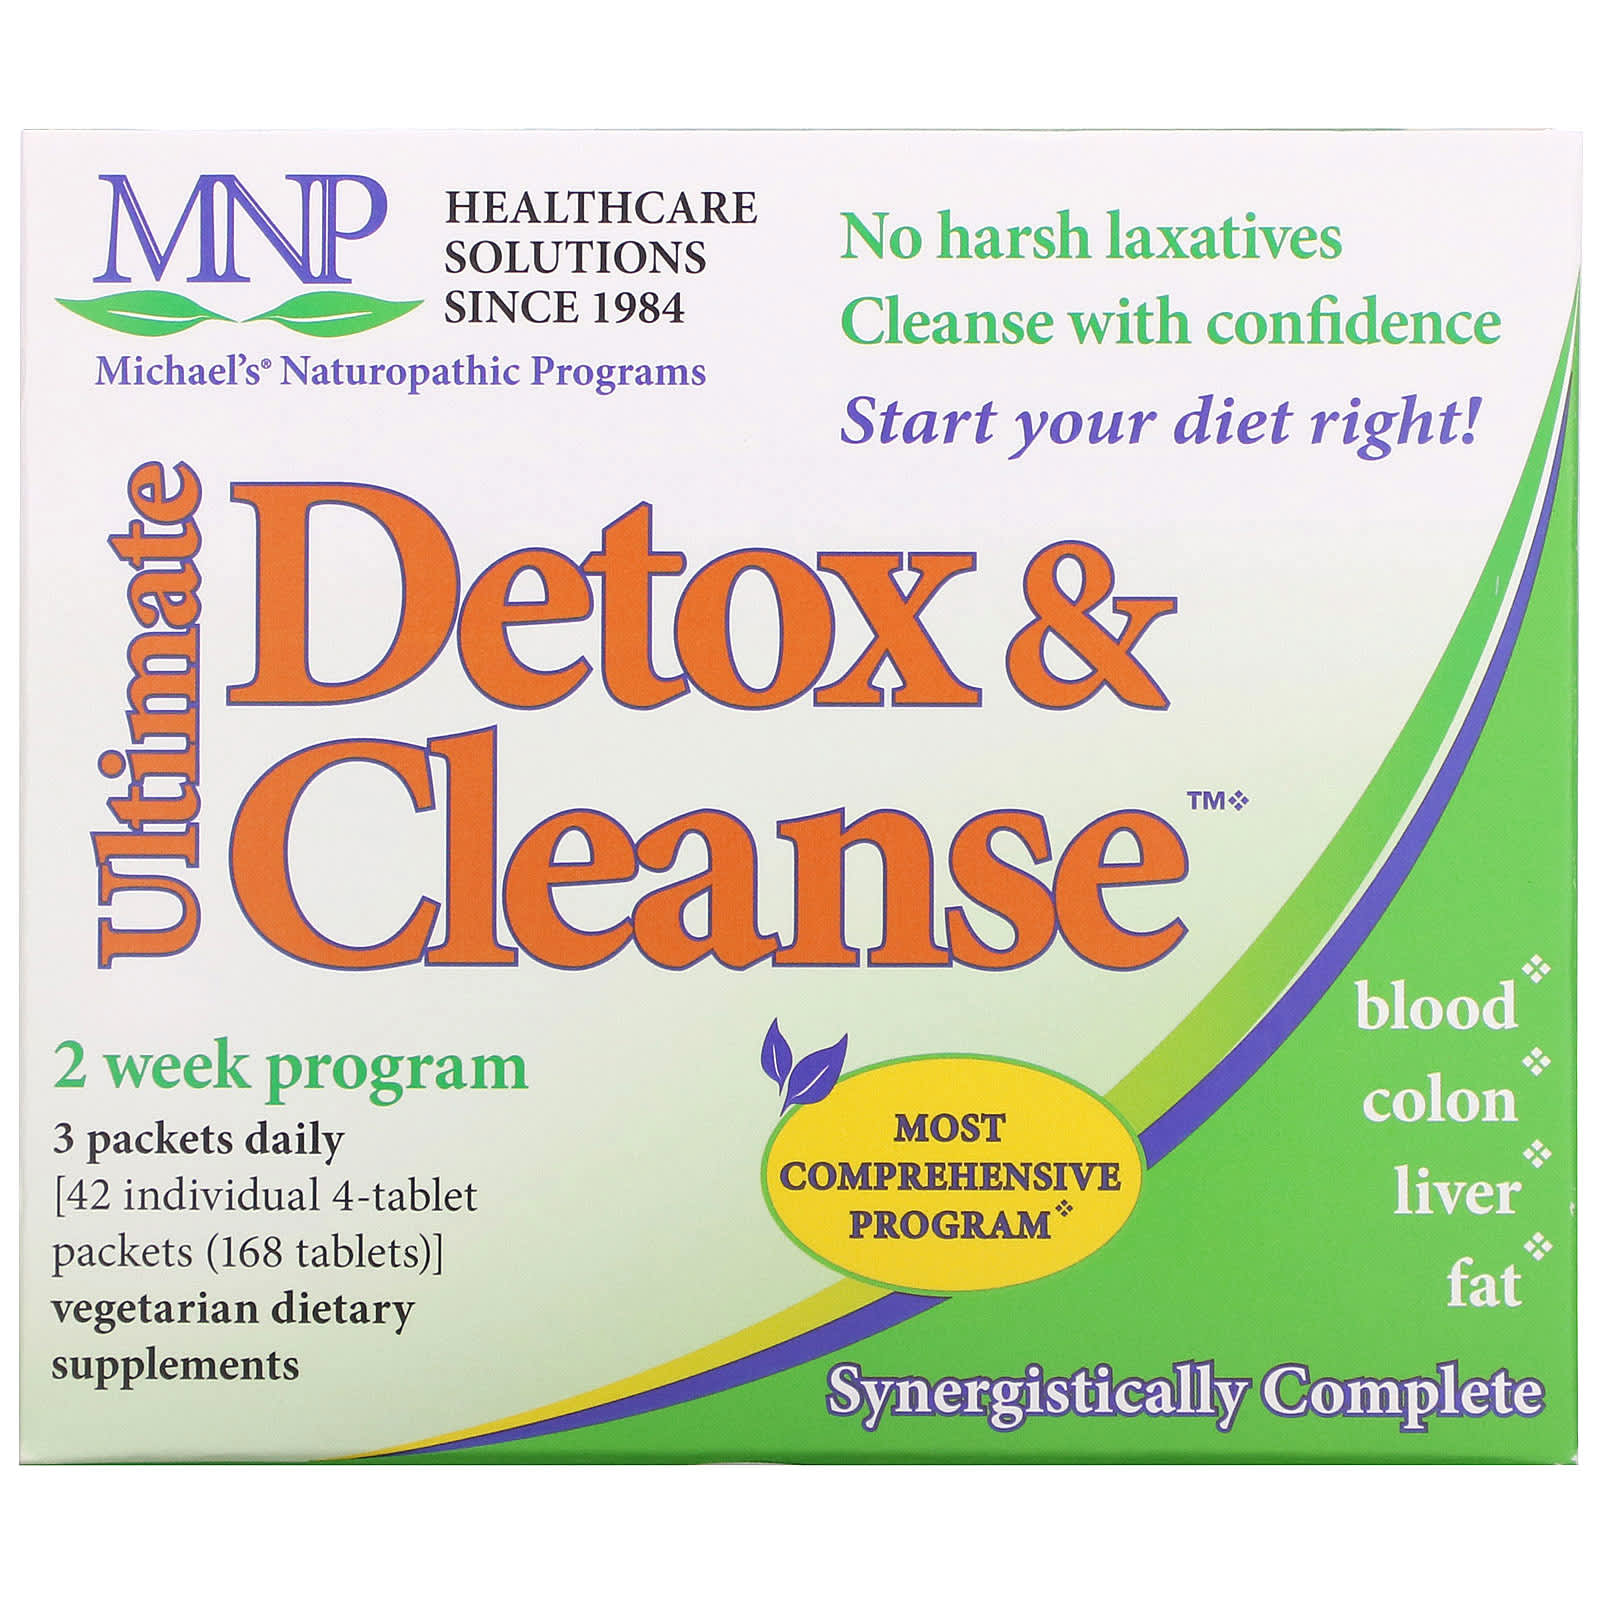 Michael's Naturopathic, Ultimate Detox & Cleanse, 20 Packets